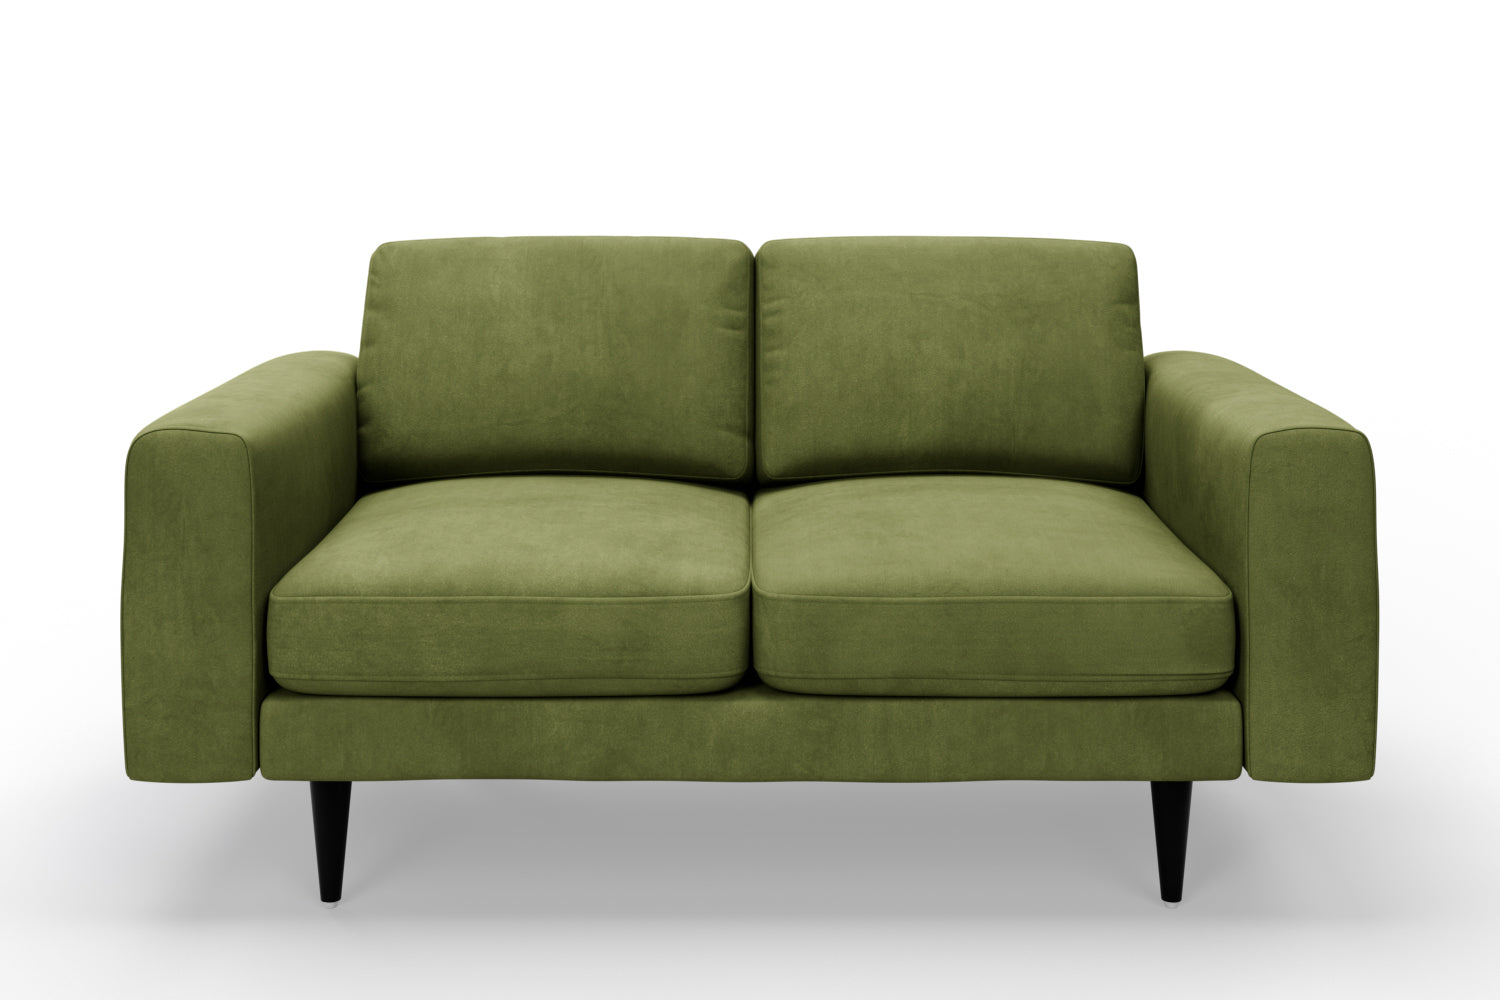 SNUG | The Big Chill 2 Seater Sofa in Olive variant_40414877712432